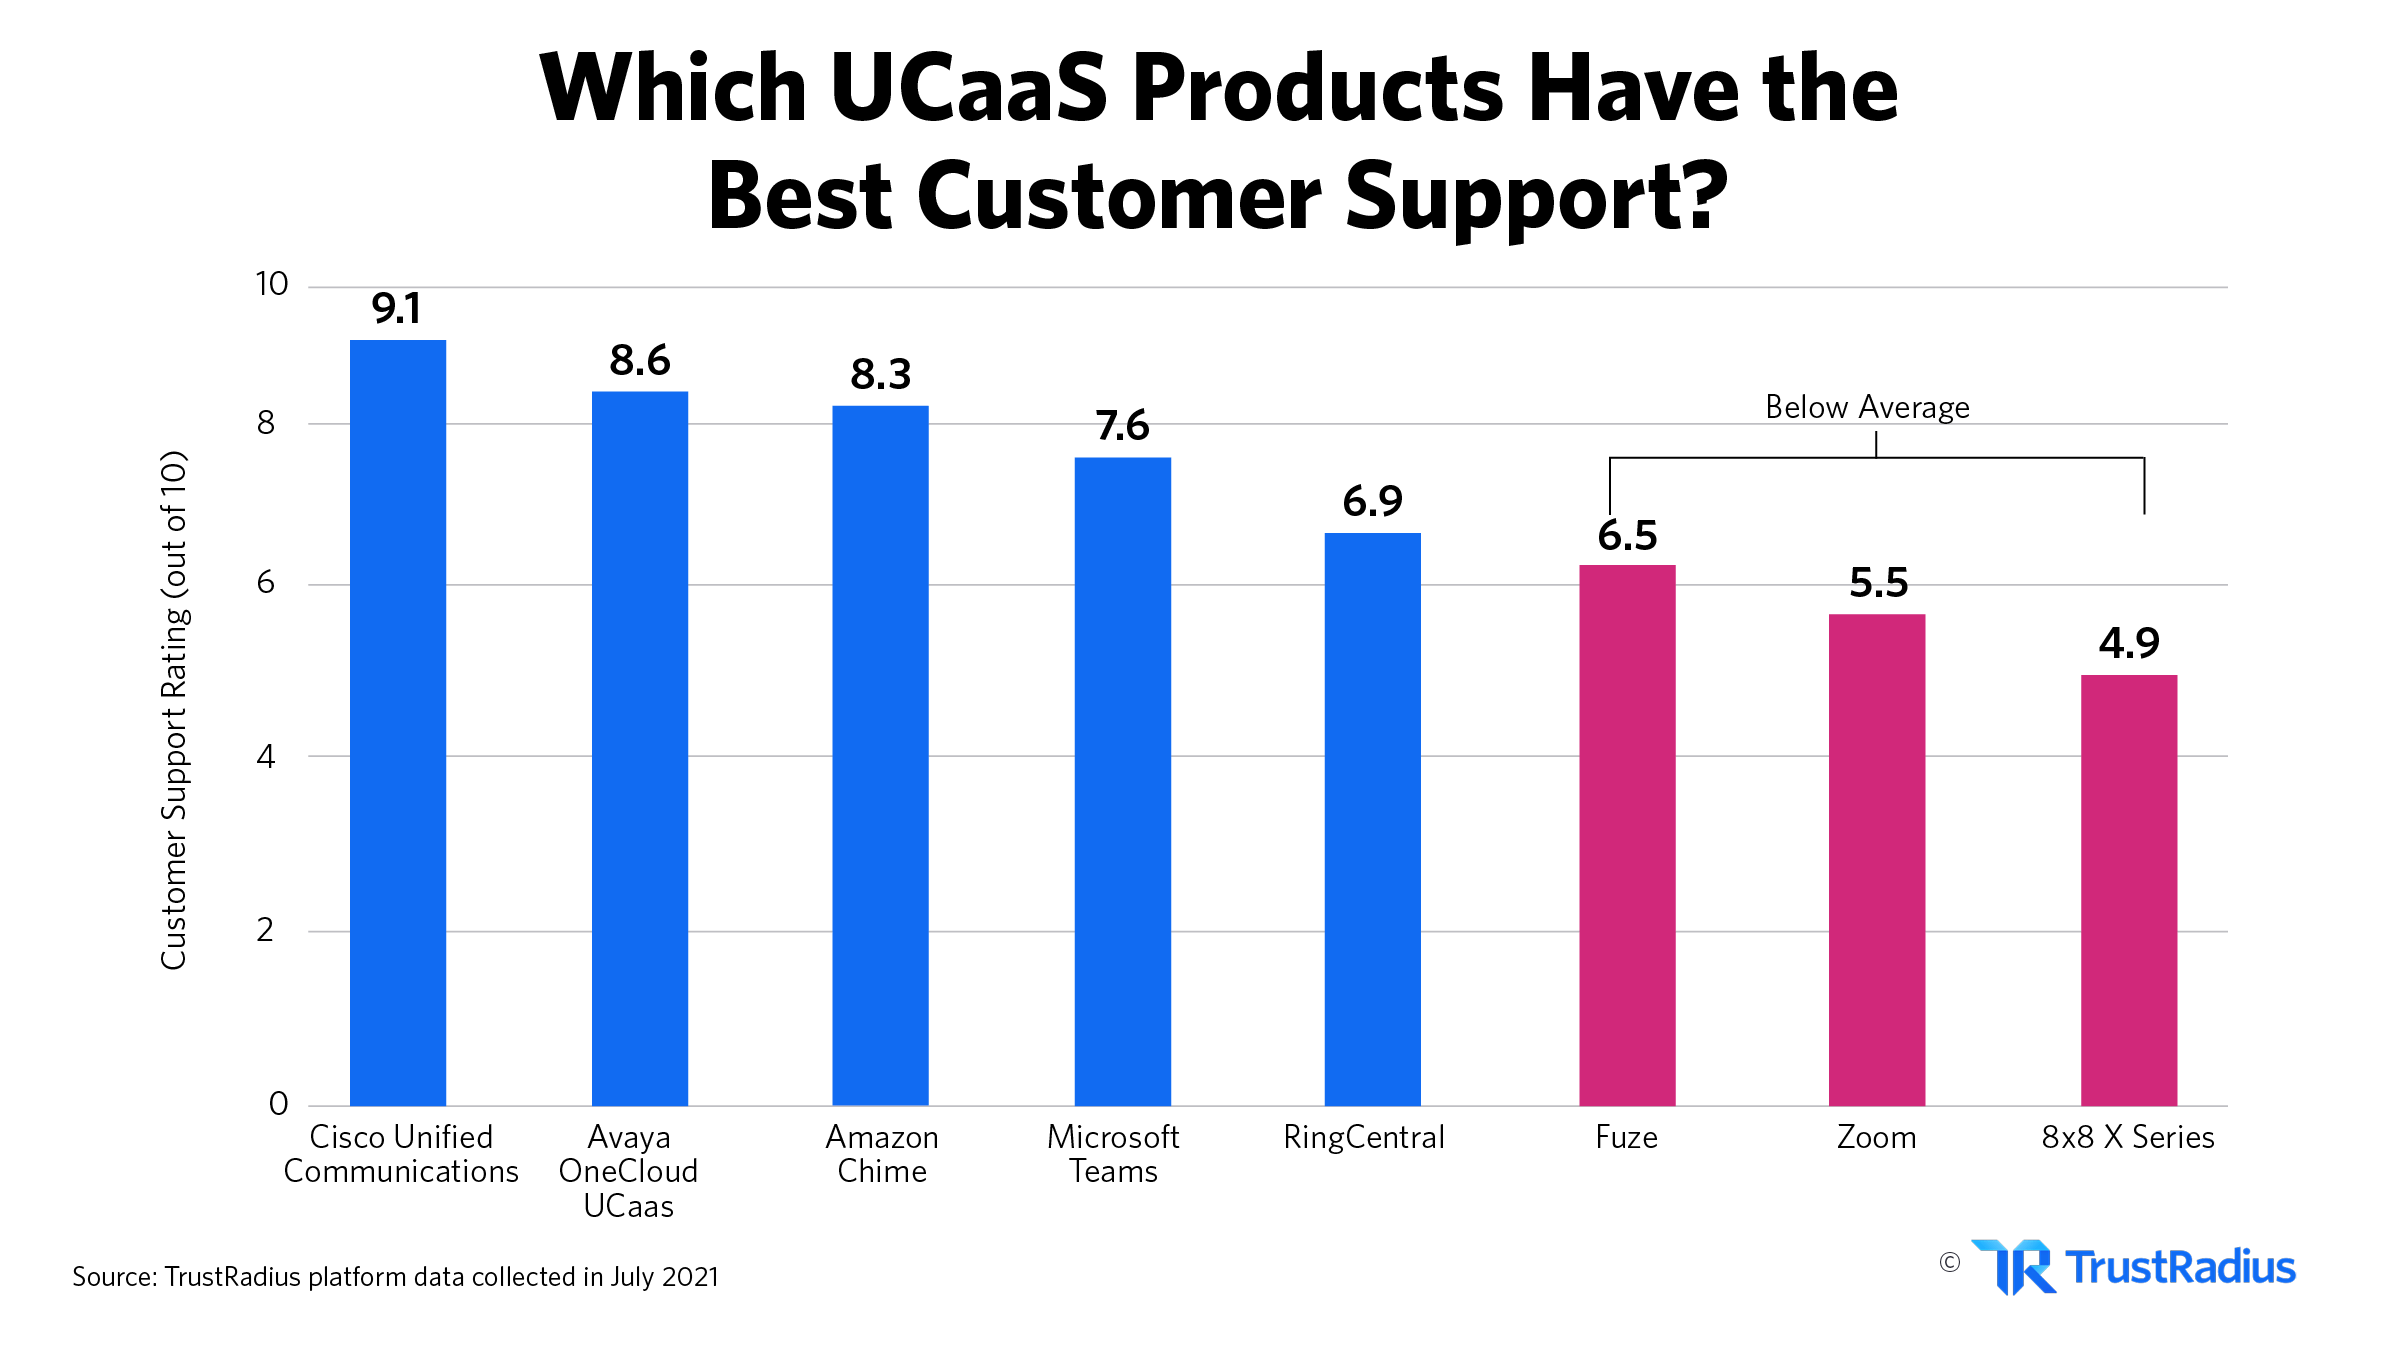 Which UCaaS products have the best customer support